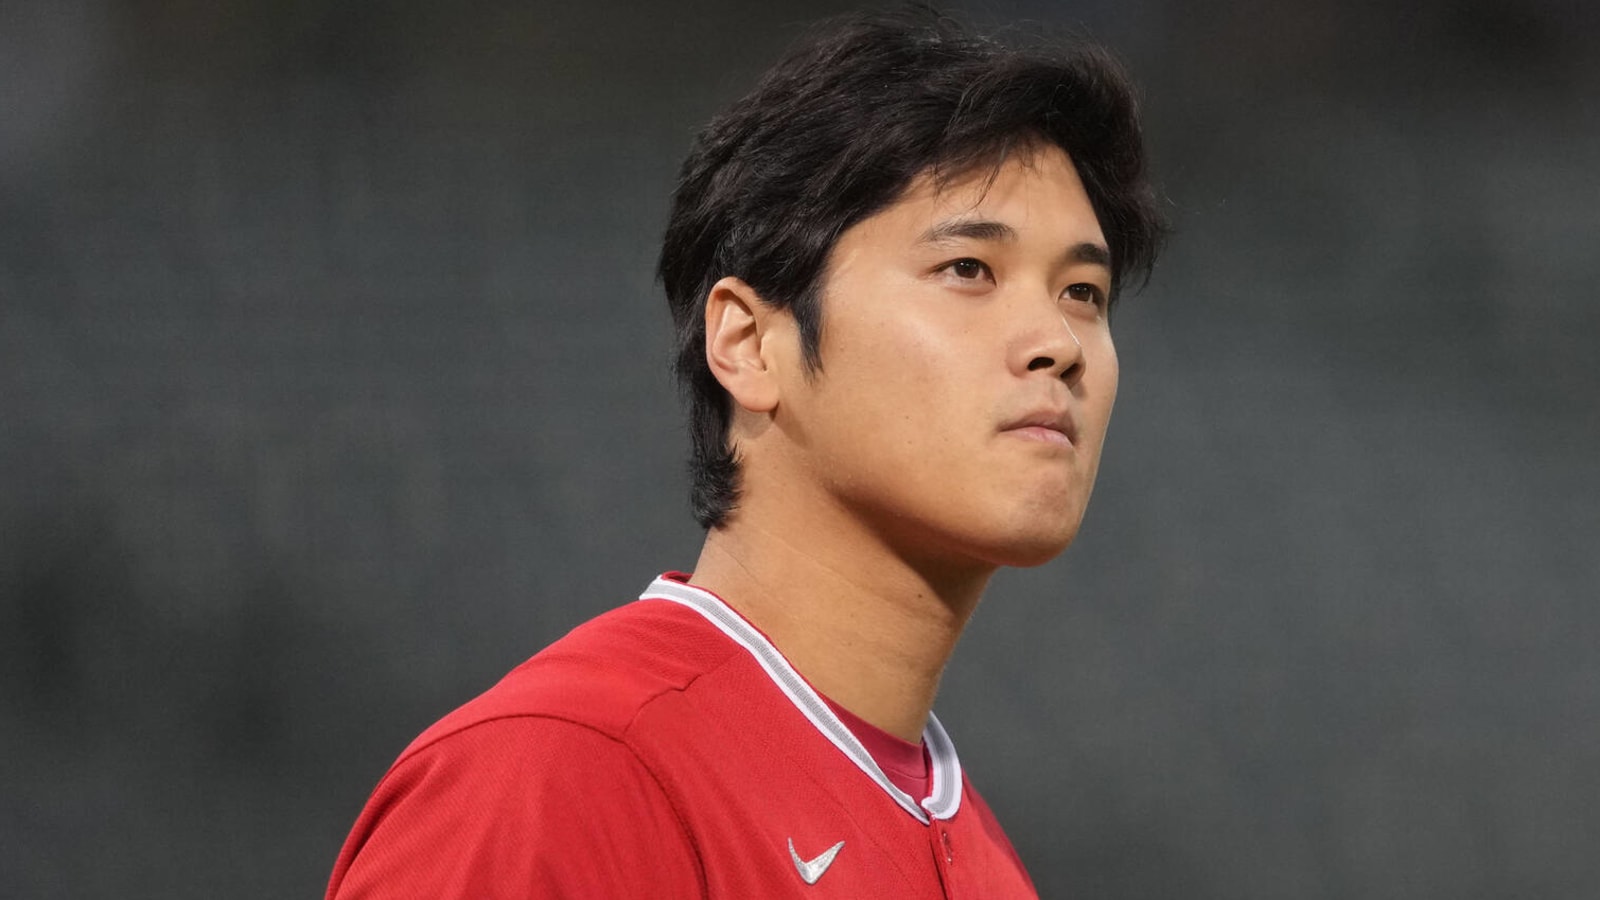 Czech Electrician Playing on WBC Team Strikes Out Shohei Ohtani